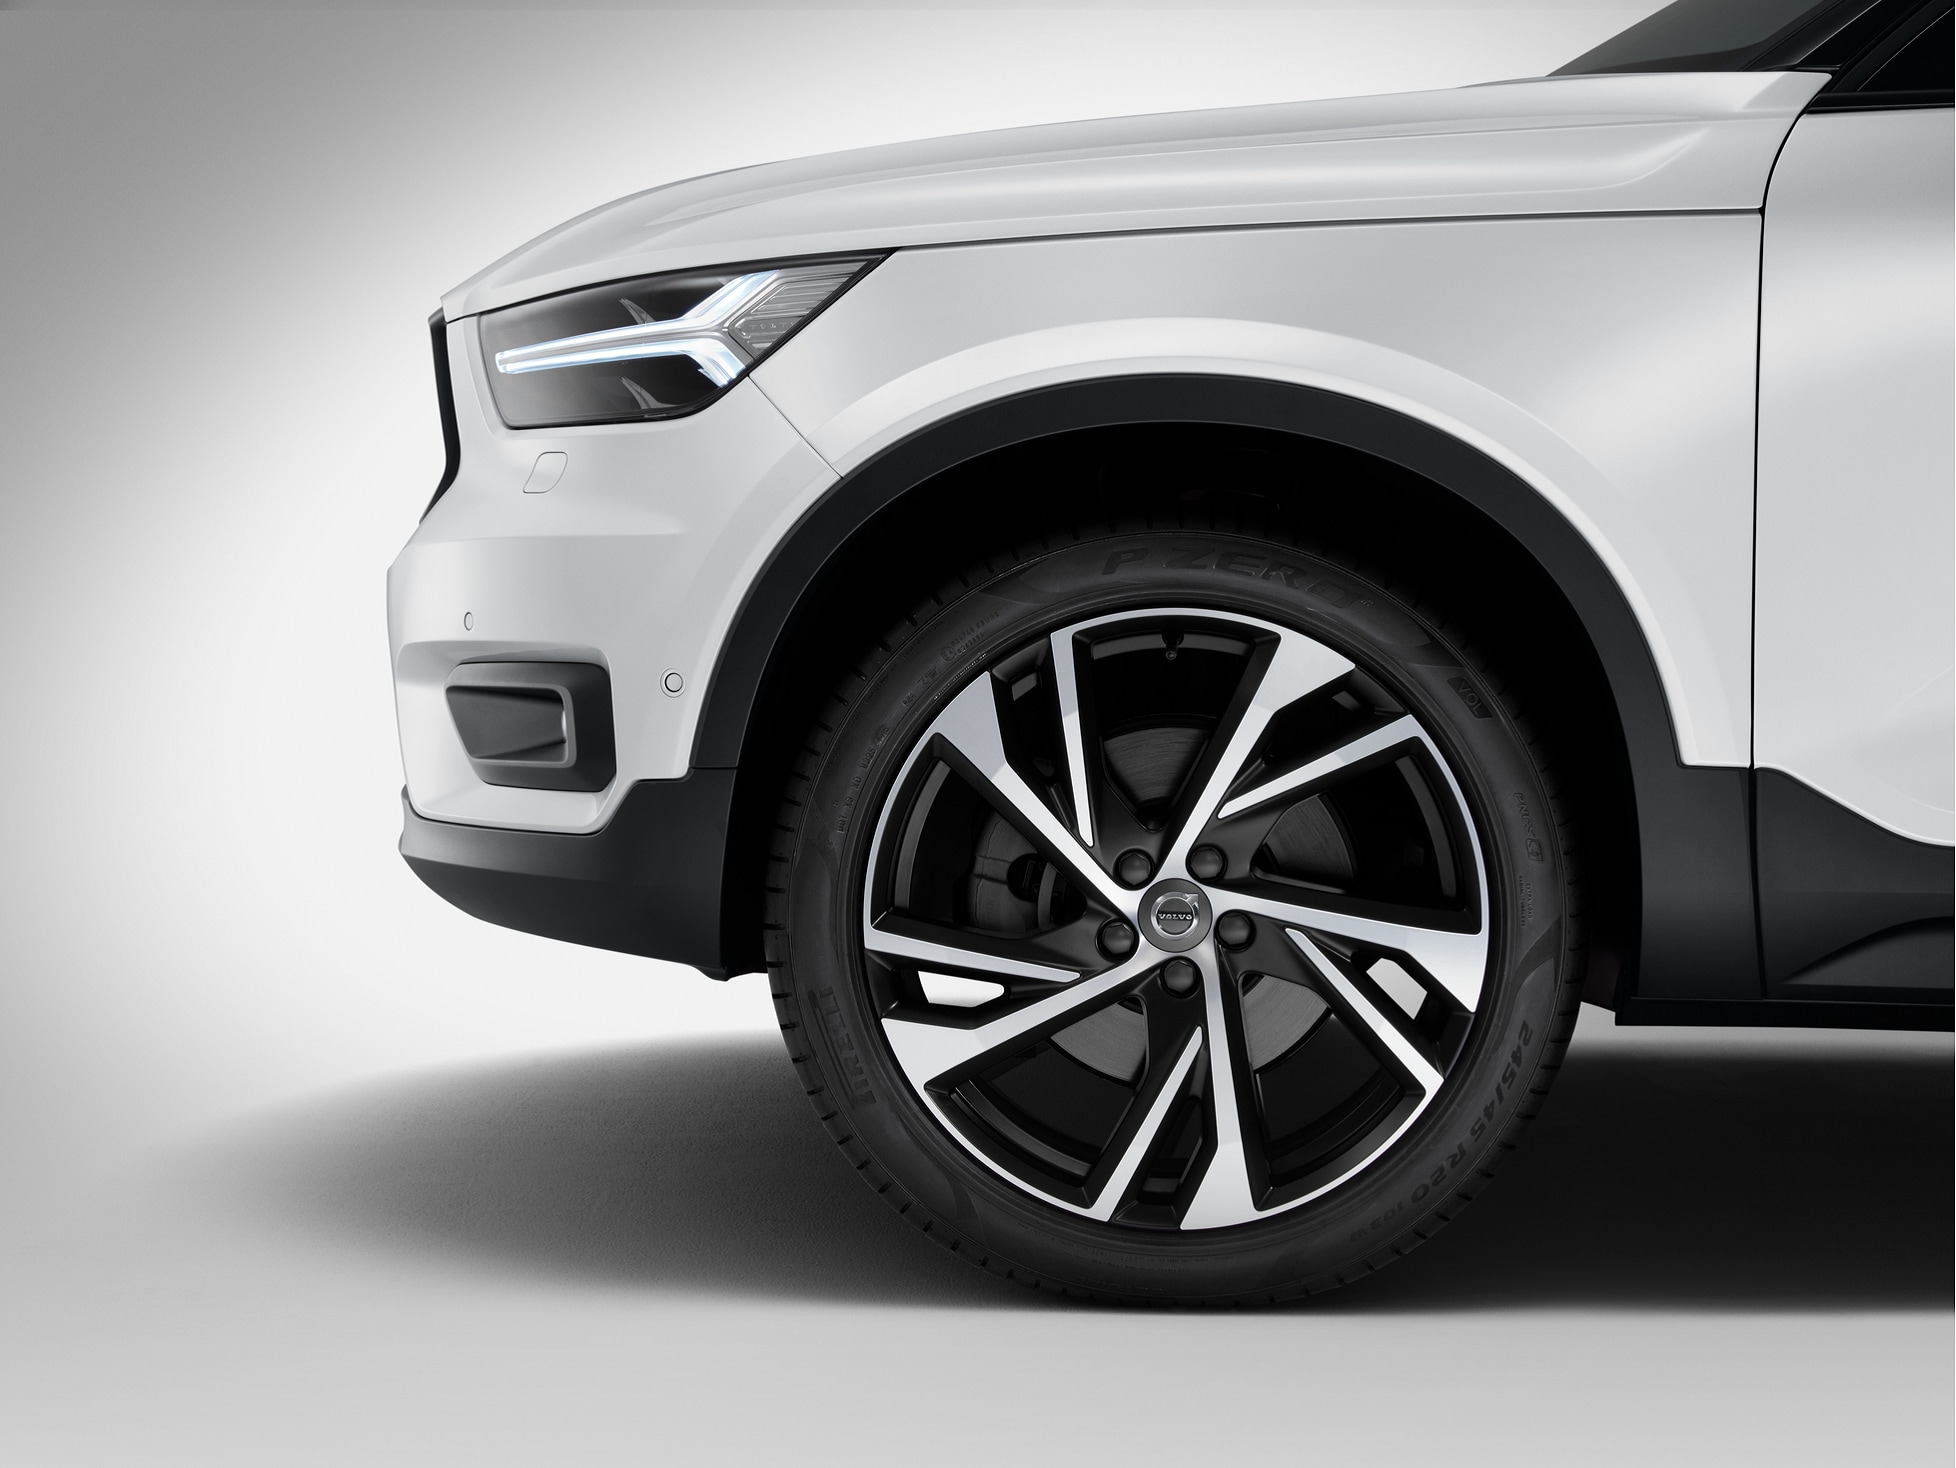 A Volvo XC40 model's wheel from left side view